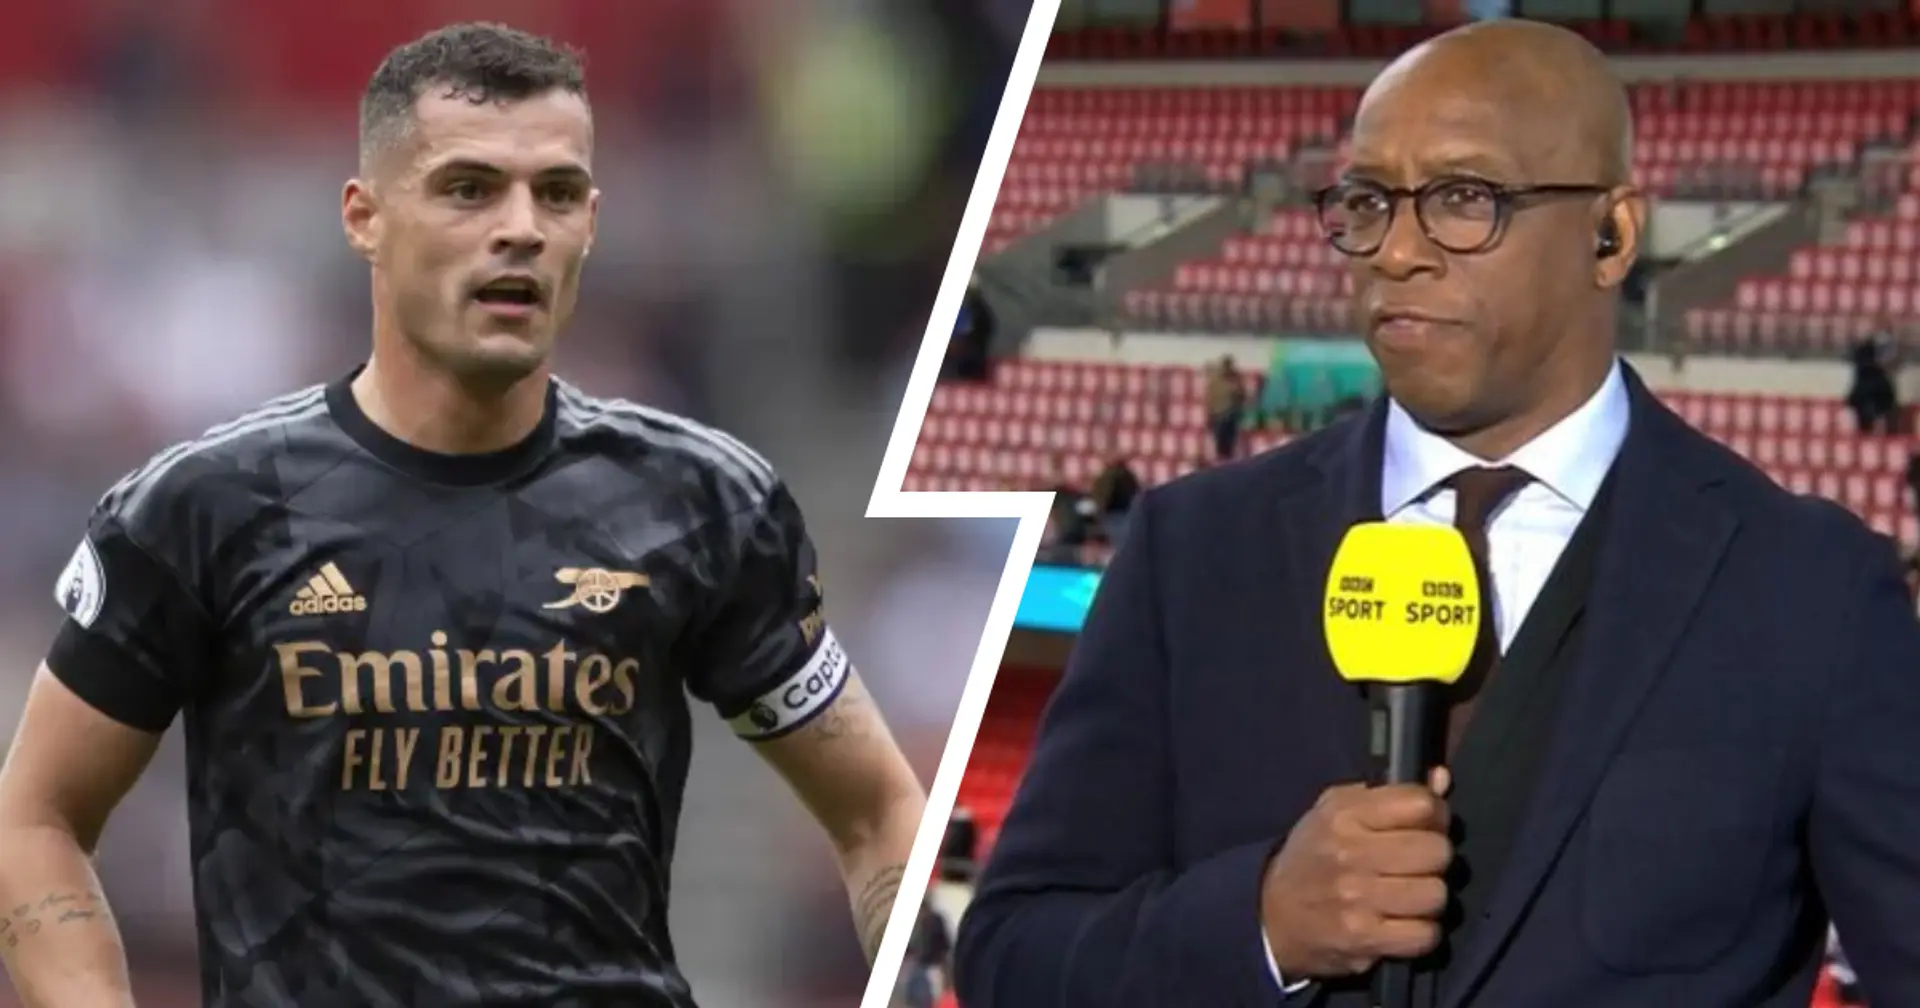 'Now we're seeing the best of him': Ian Wright praises Granit Xhaka for turning his Arsenal career around